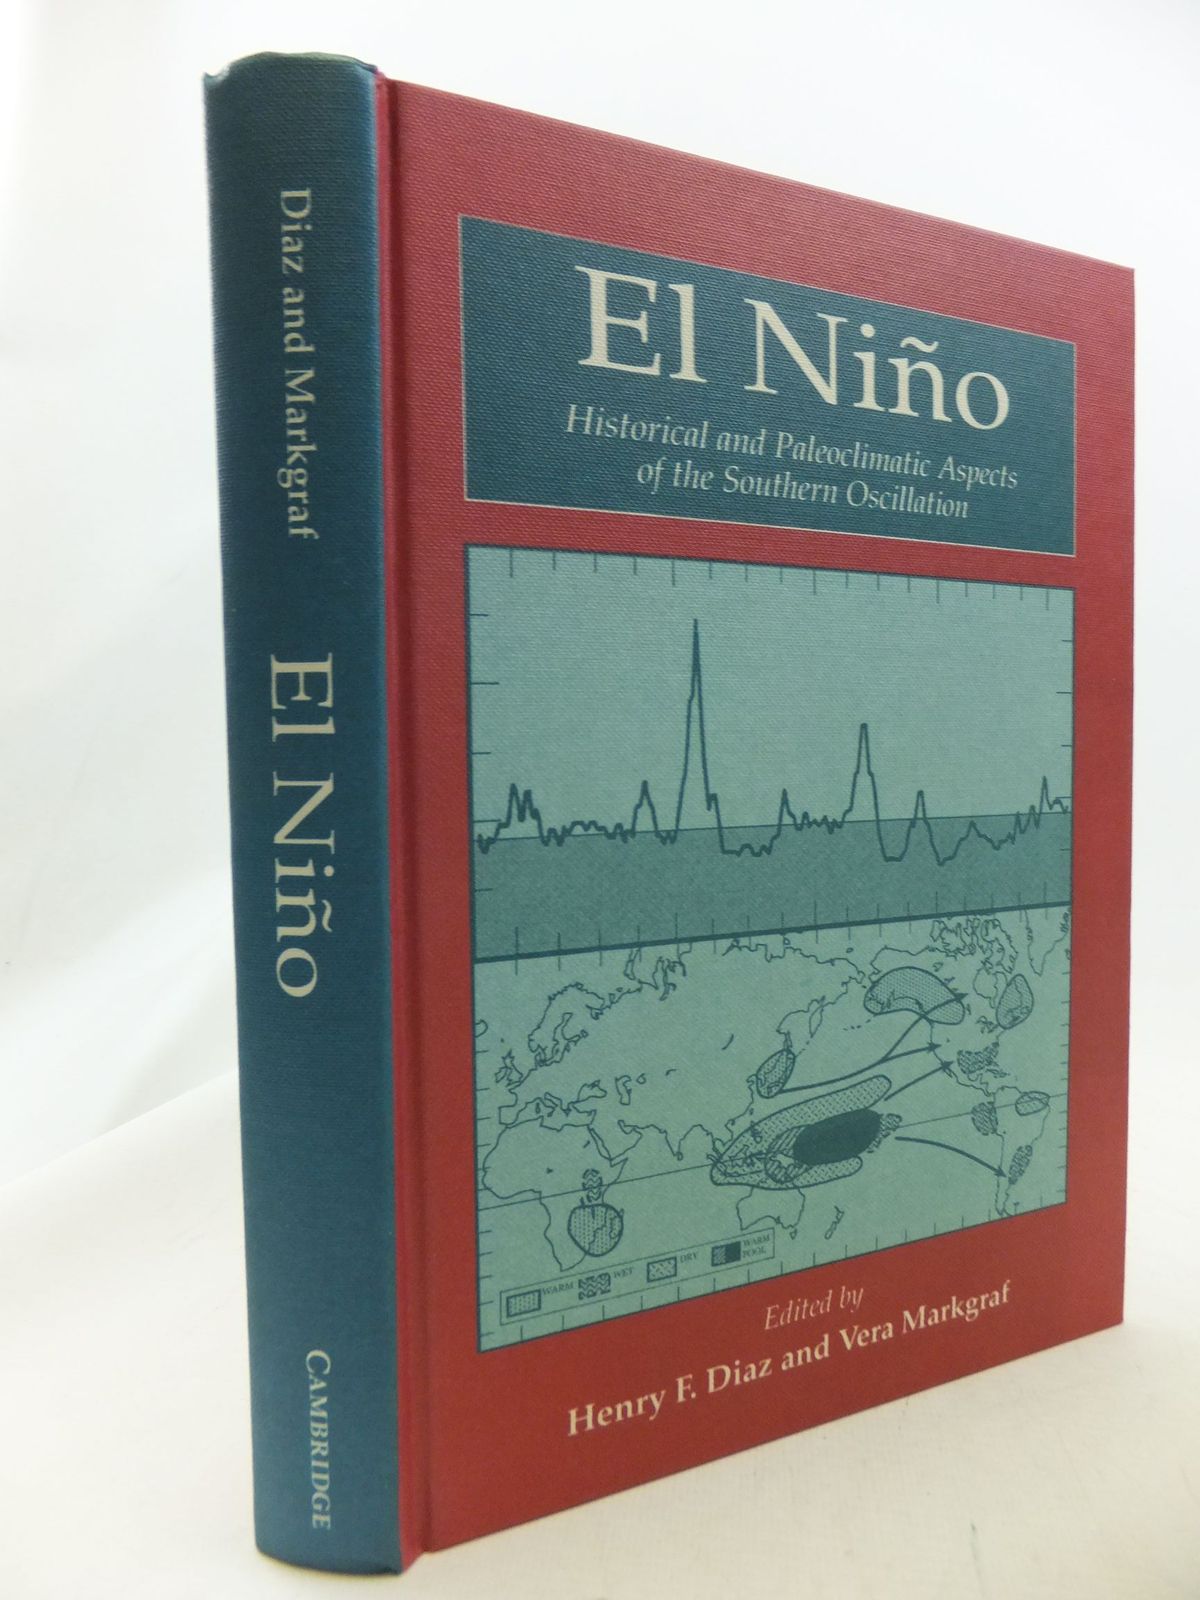 El Nino: Historical And Paleoclimatic Aspects Of The Southern Oscillation